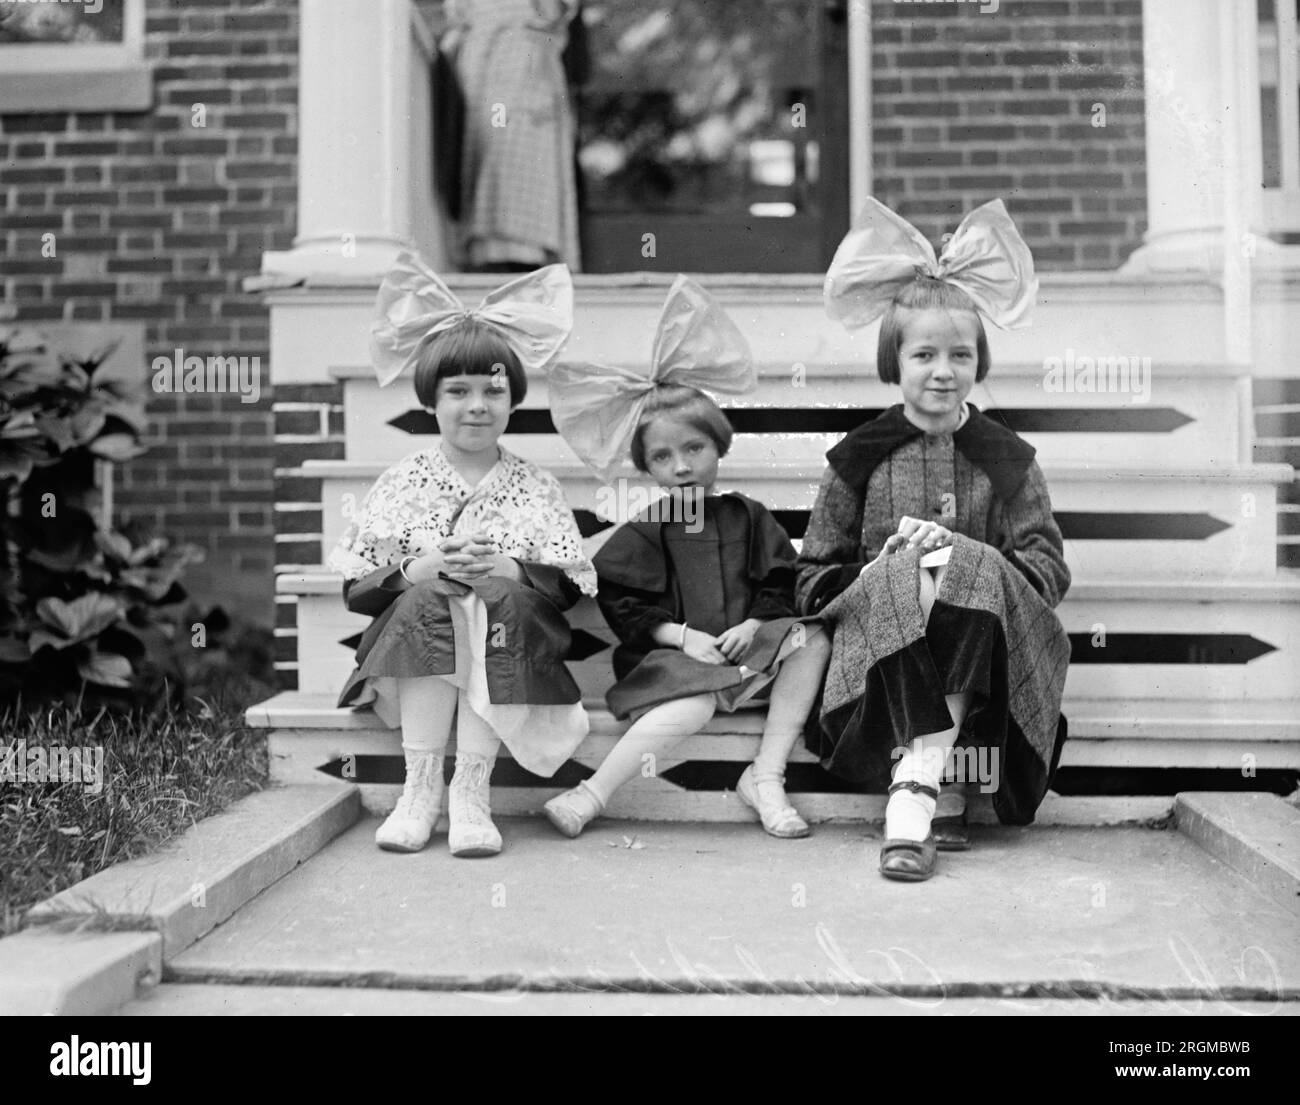 three young children sitting on a porch wearing large bows in their hair ca 1920 2RGMBWB